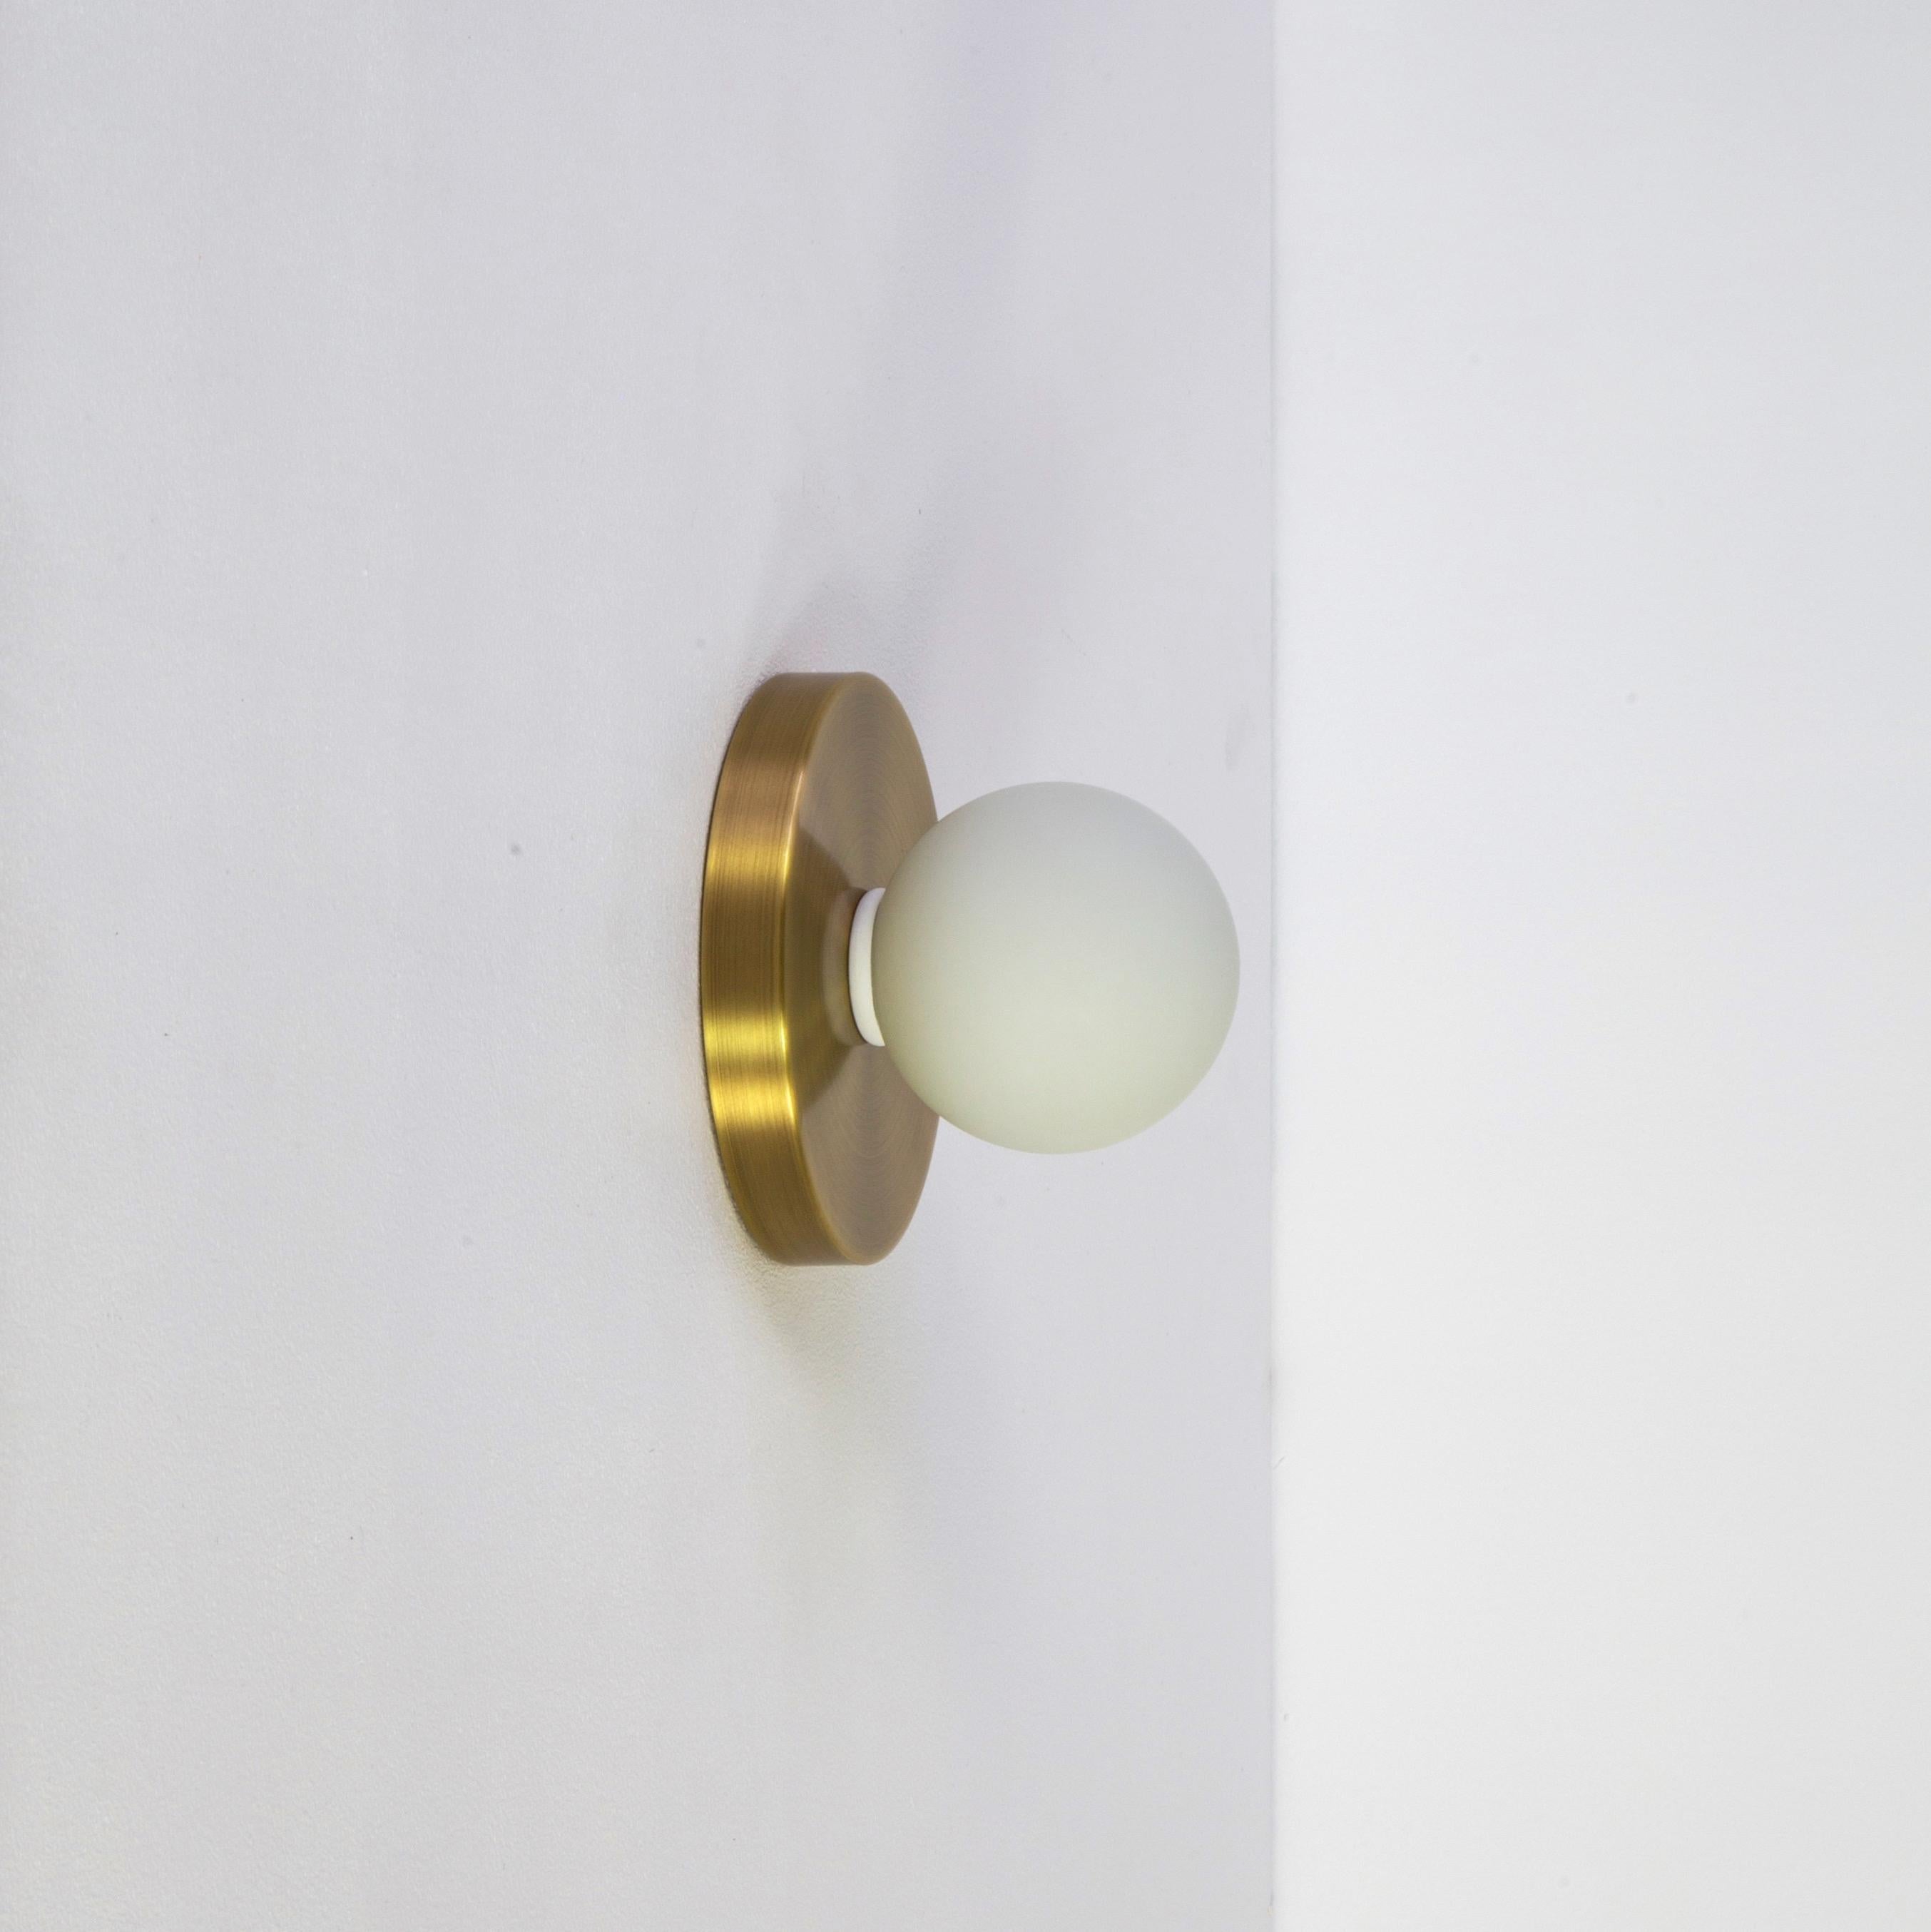 American Pair of Globe Sconces by Research.Lighting, Brushed Brass, Made to Order For Sale